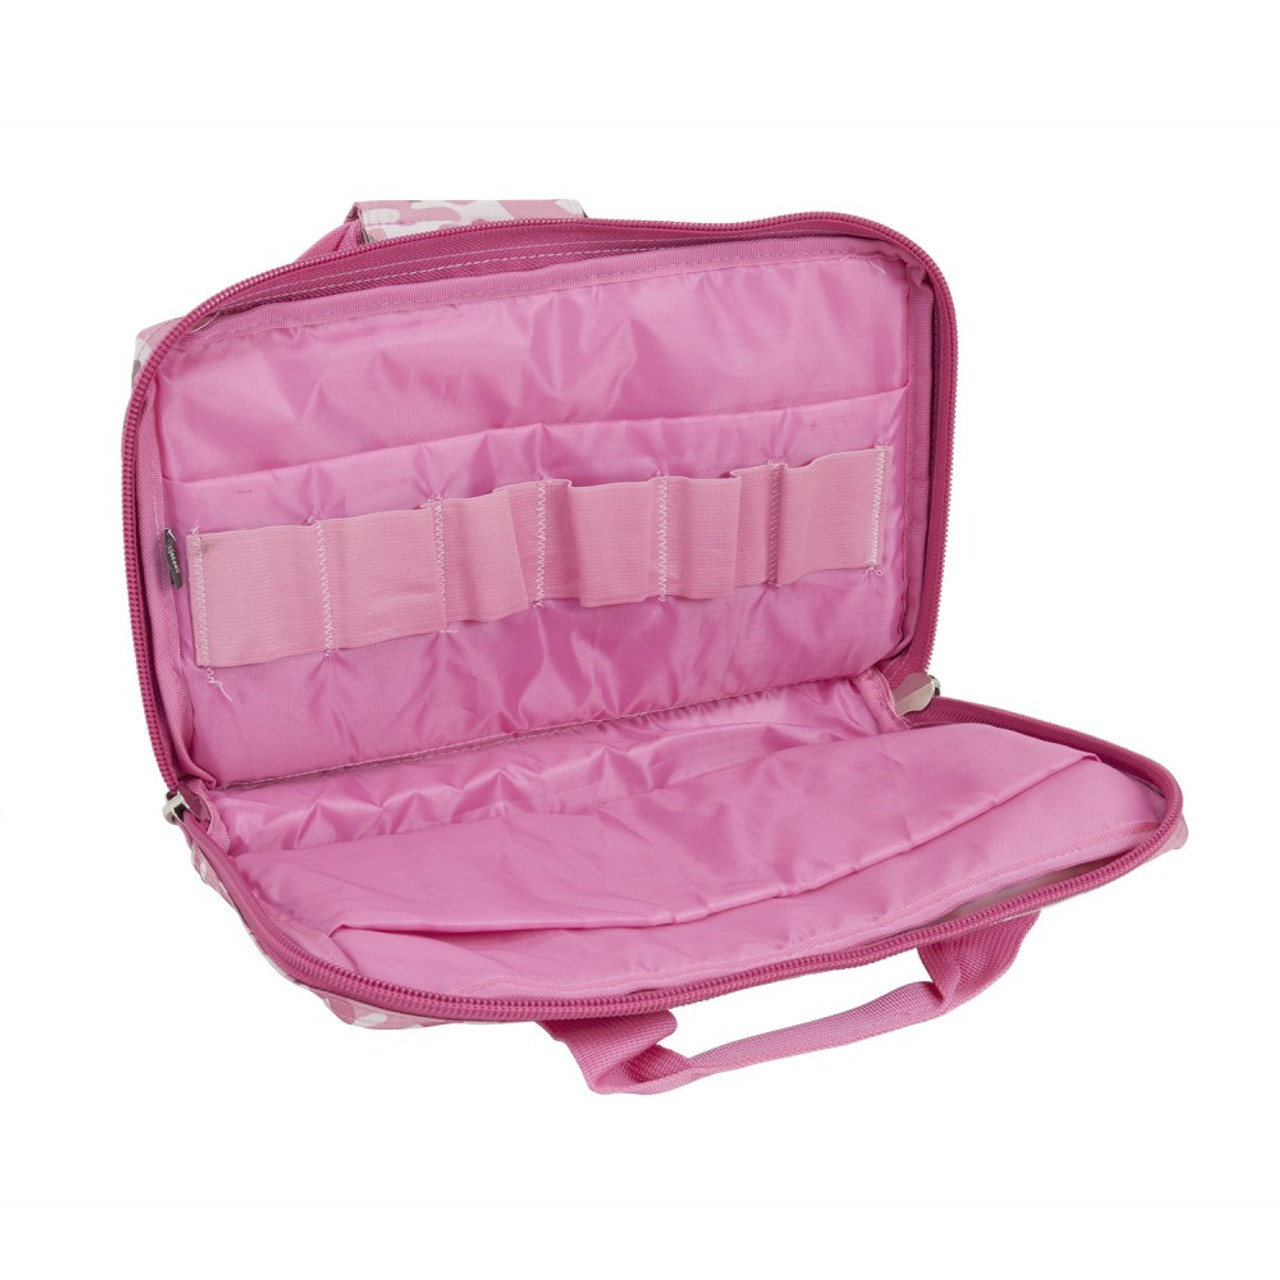 NcSTAR CPP2903 Discreet Padded Pistol Case with Magazine Storage